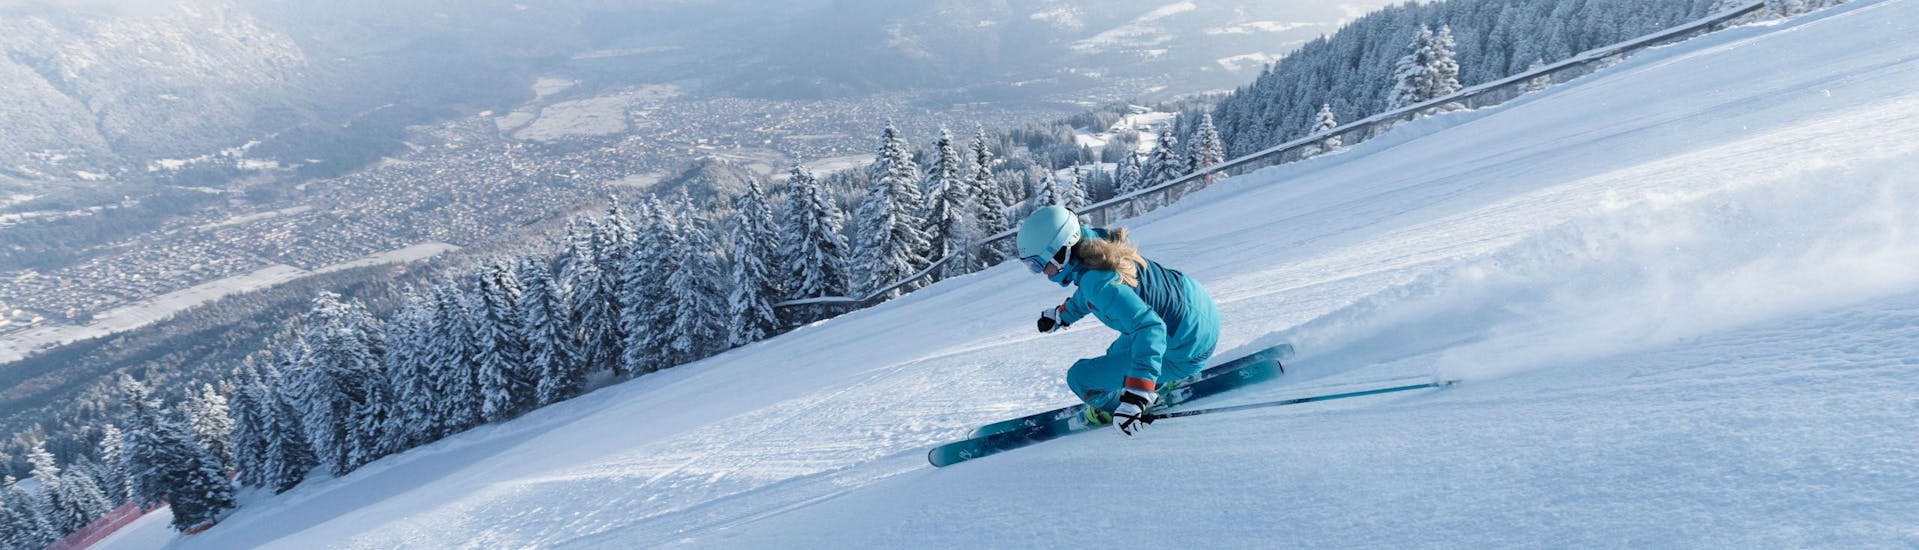 A female skier is speeding down a perfectly prepared slope overlooking the ski resort of Garmisch-Classic, where local ski schools offer a broad selection of ski lessons. (c)Bayerische Zugspitzbahn Bergbahn AGfendstudios.com